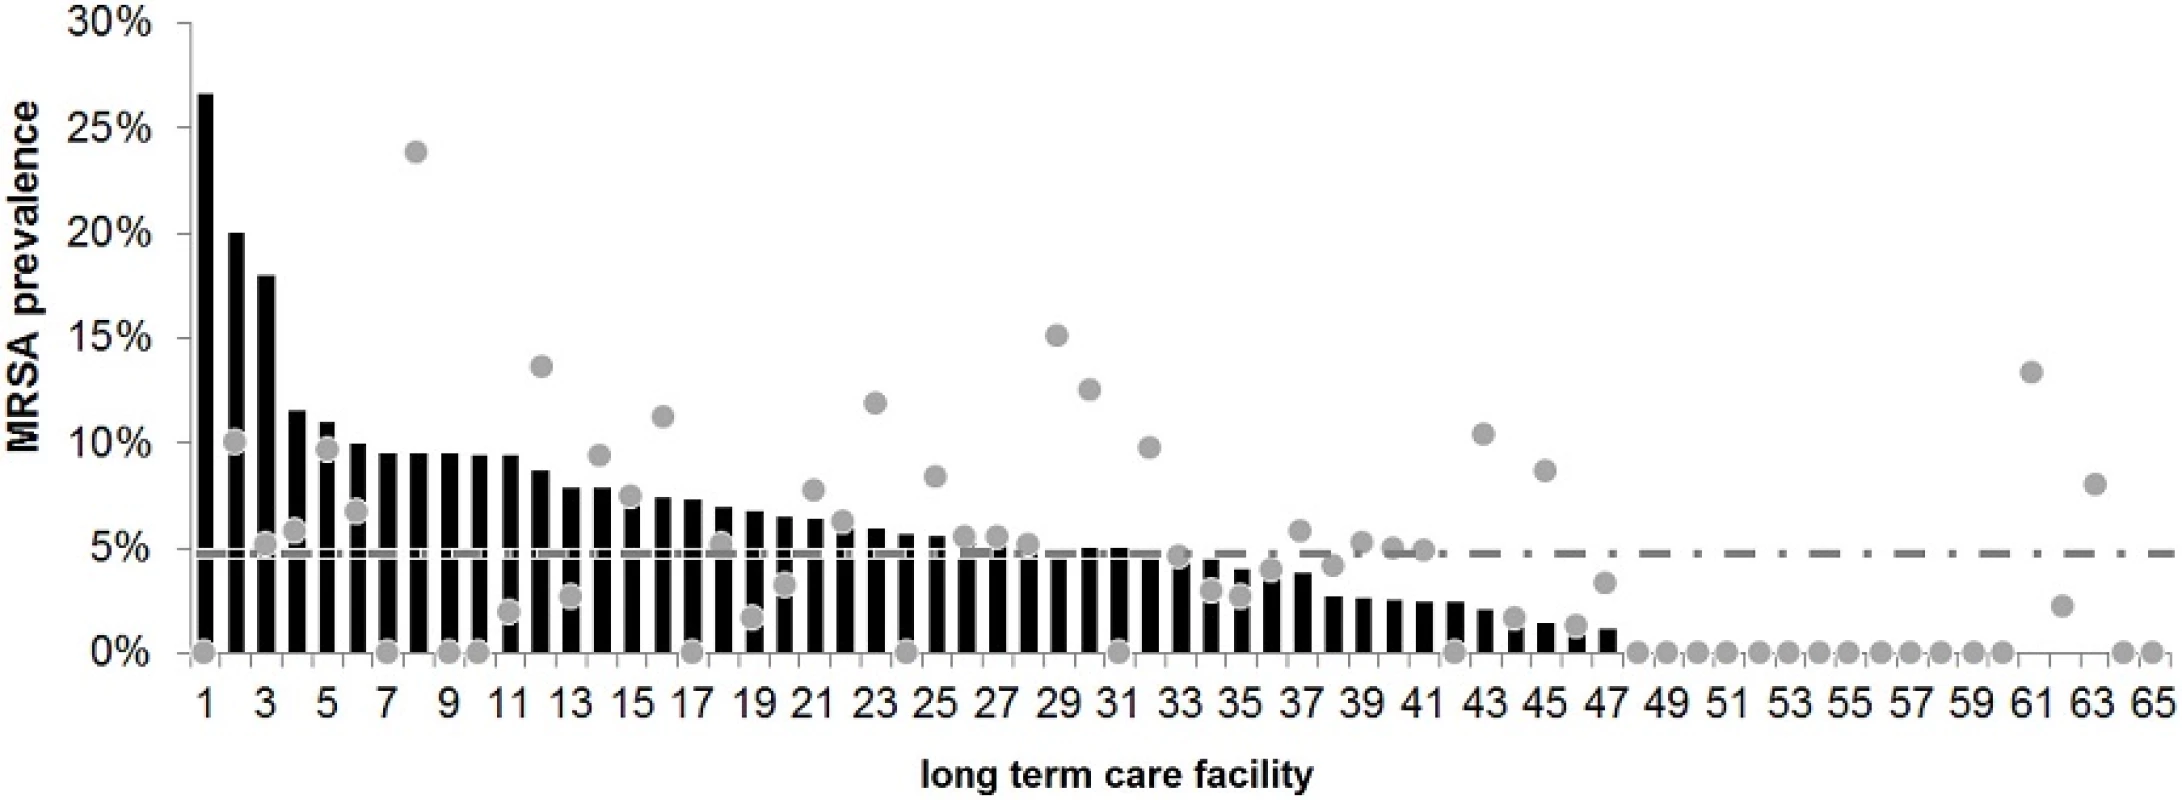 MRSA prevalence in nursing homes in Saarland, Germany. Shown is the MRSA prevalence (MRSA cases in percent) of the various LTCF sorted by result. The dots represent the expected rate of MRSA prevalence based to the LTCF pre-study information; the dashed line shows the mean MRSA rate throughout the entire study population.